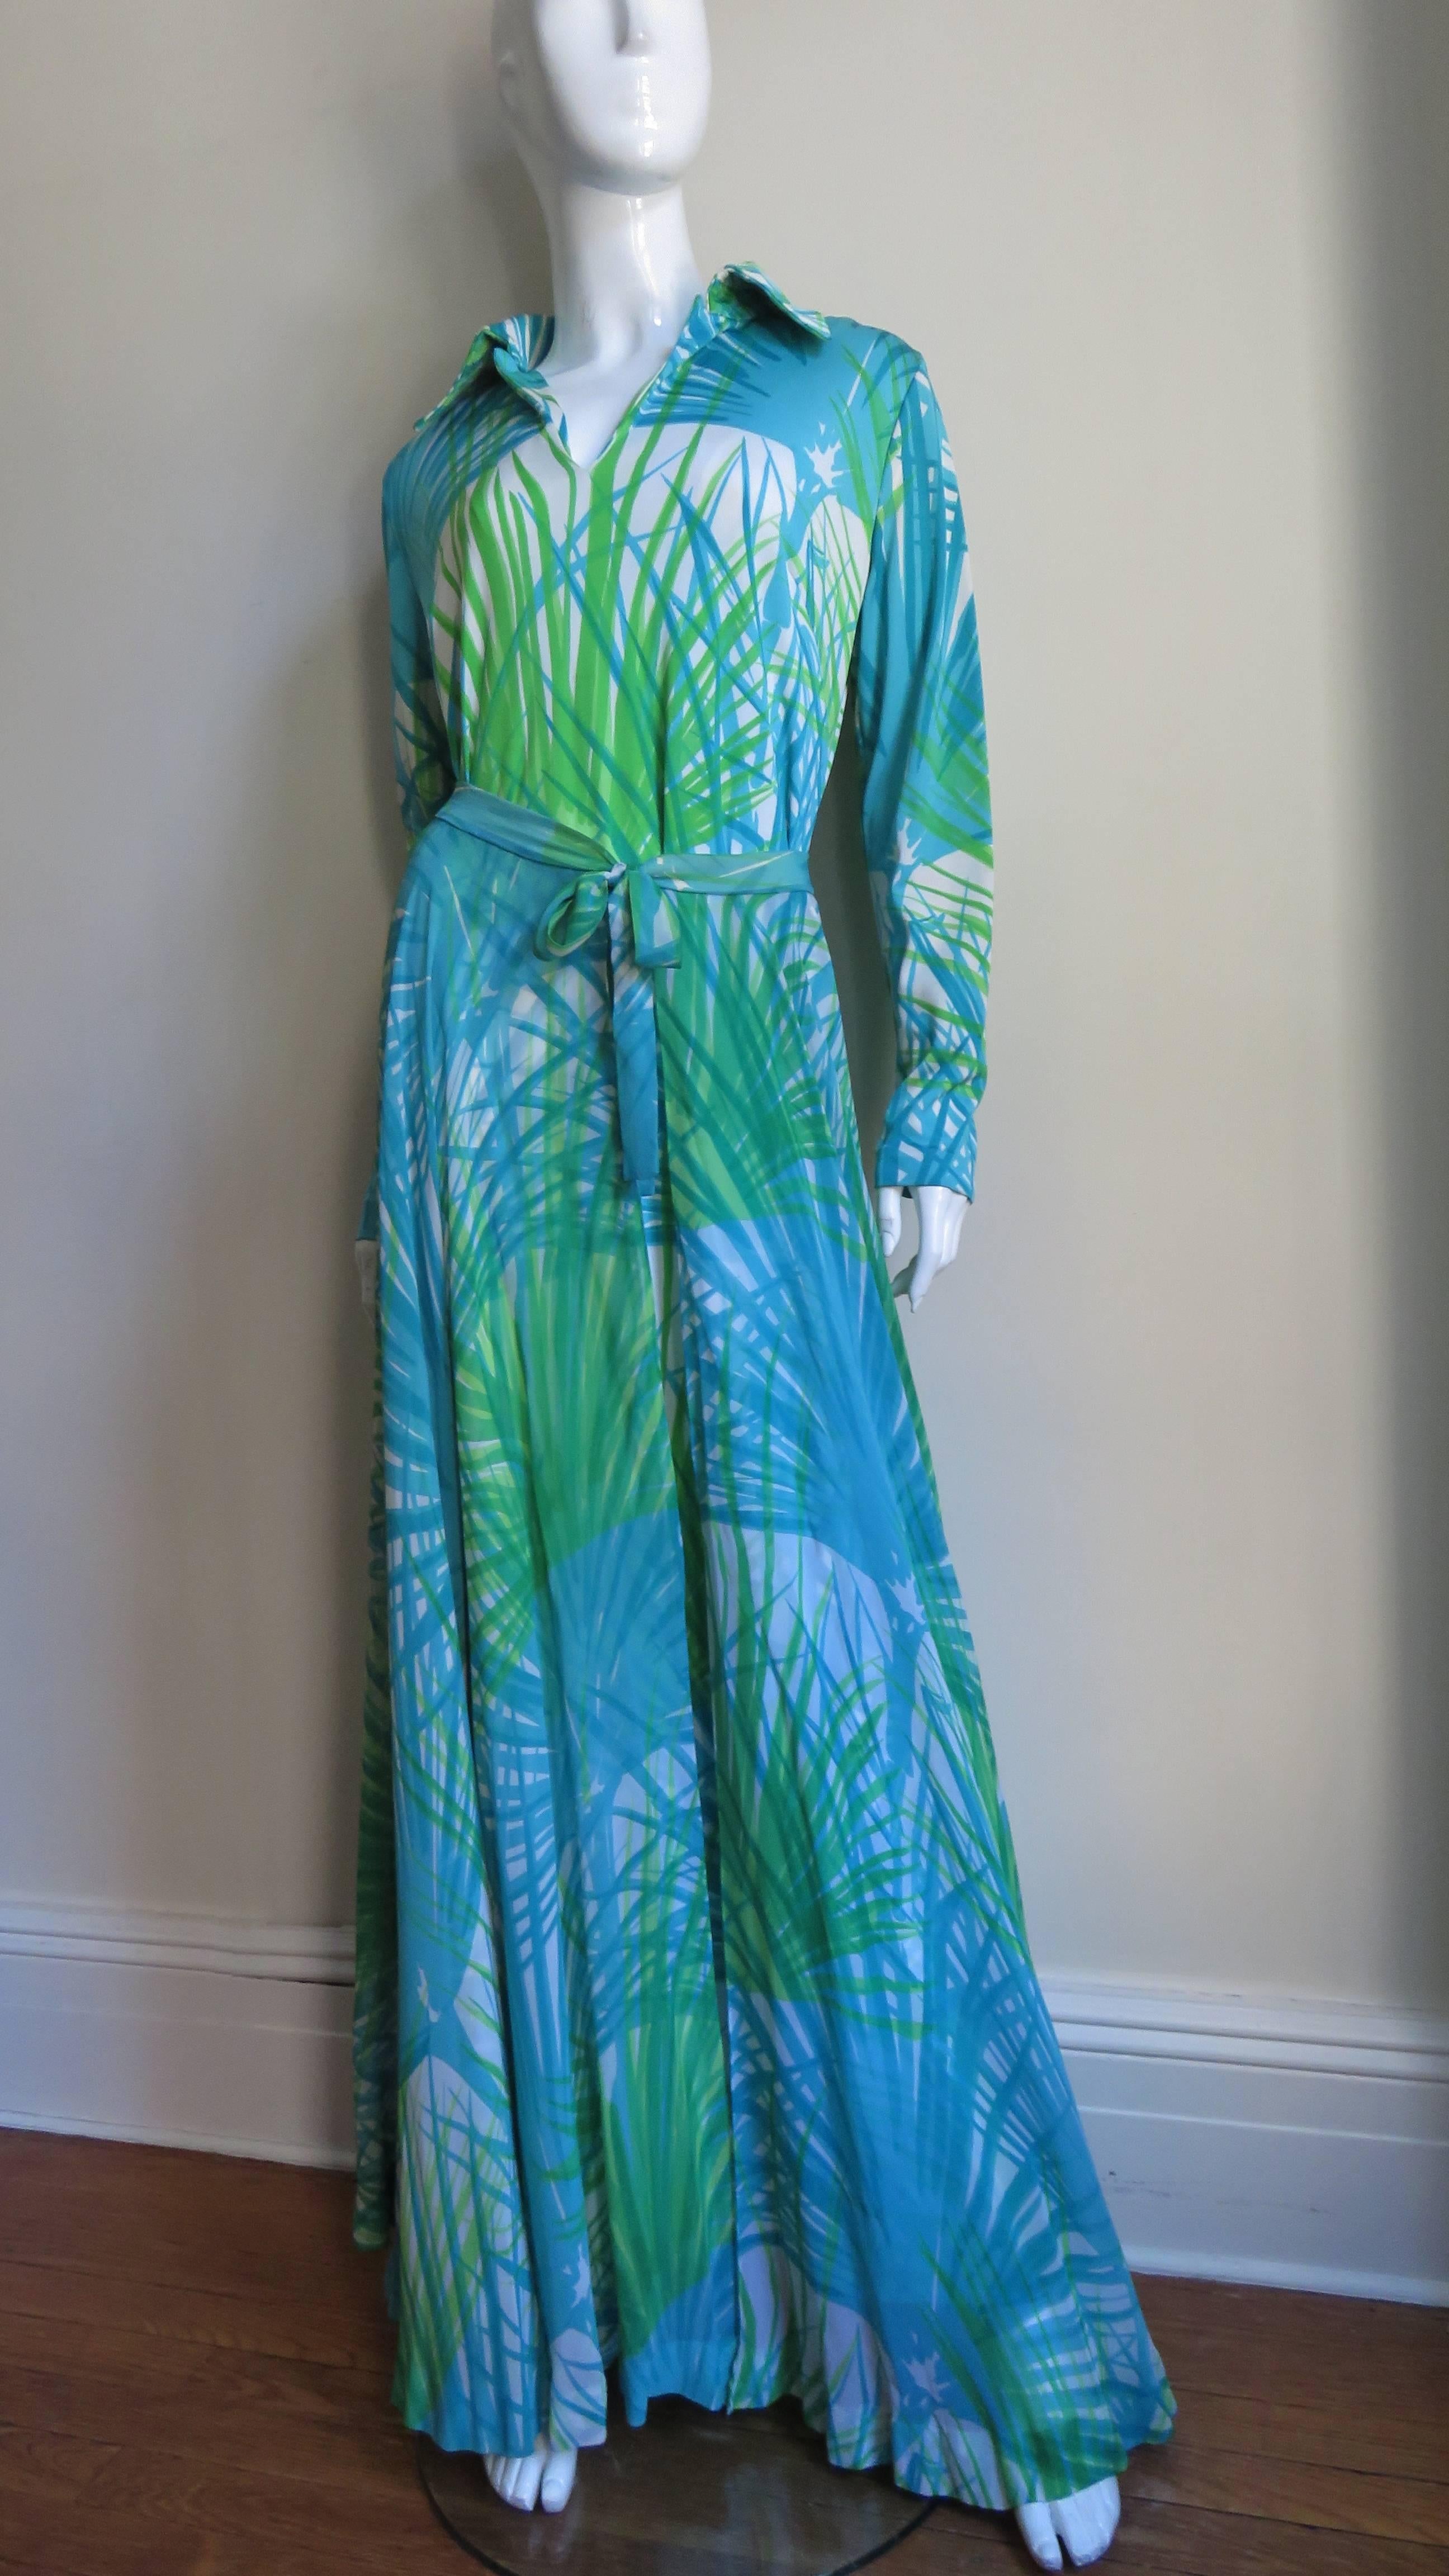 A three piece set from La Mendola, Italy consisting of a long dress, a tie belt and a matching silk over skirt. The pattern is an abstract long grass pattern in shades of blues and greens on synthetic jersey.  The dress has a V neck with a